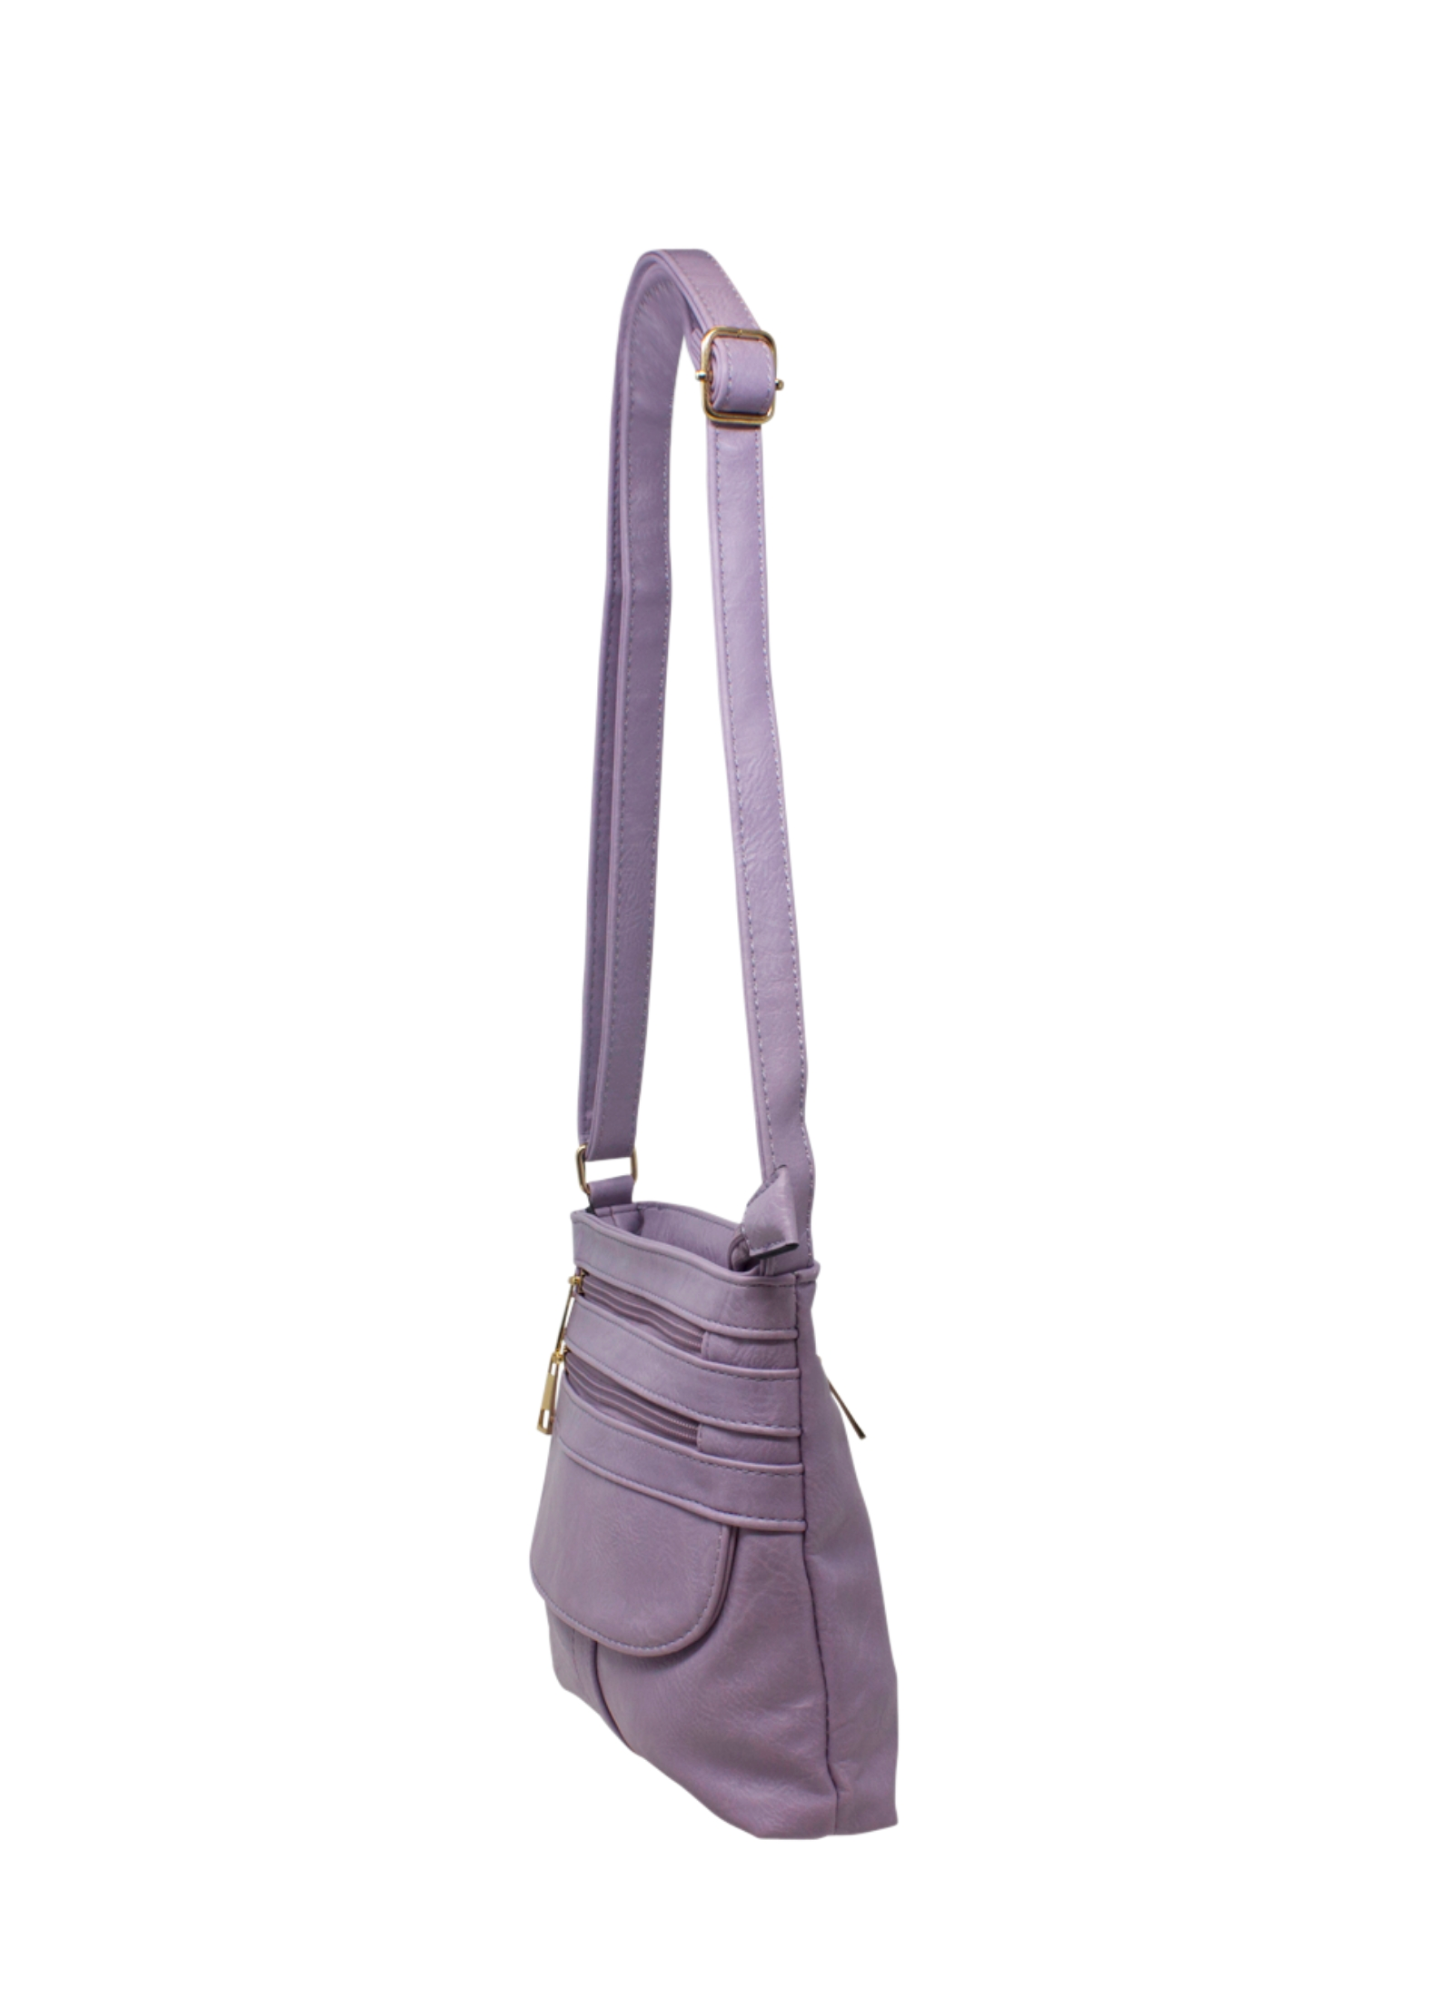 The Edit - Vintage Style Faux Leather Cross-Body Bag in Lavender